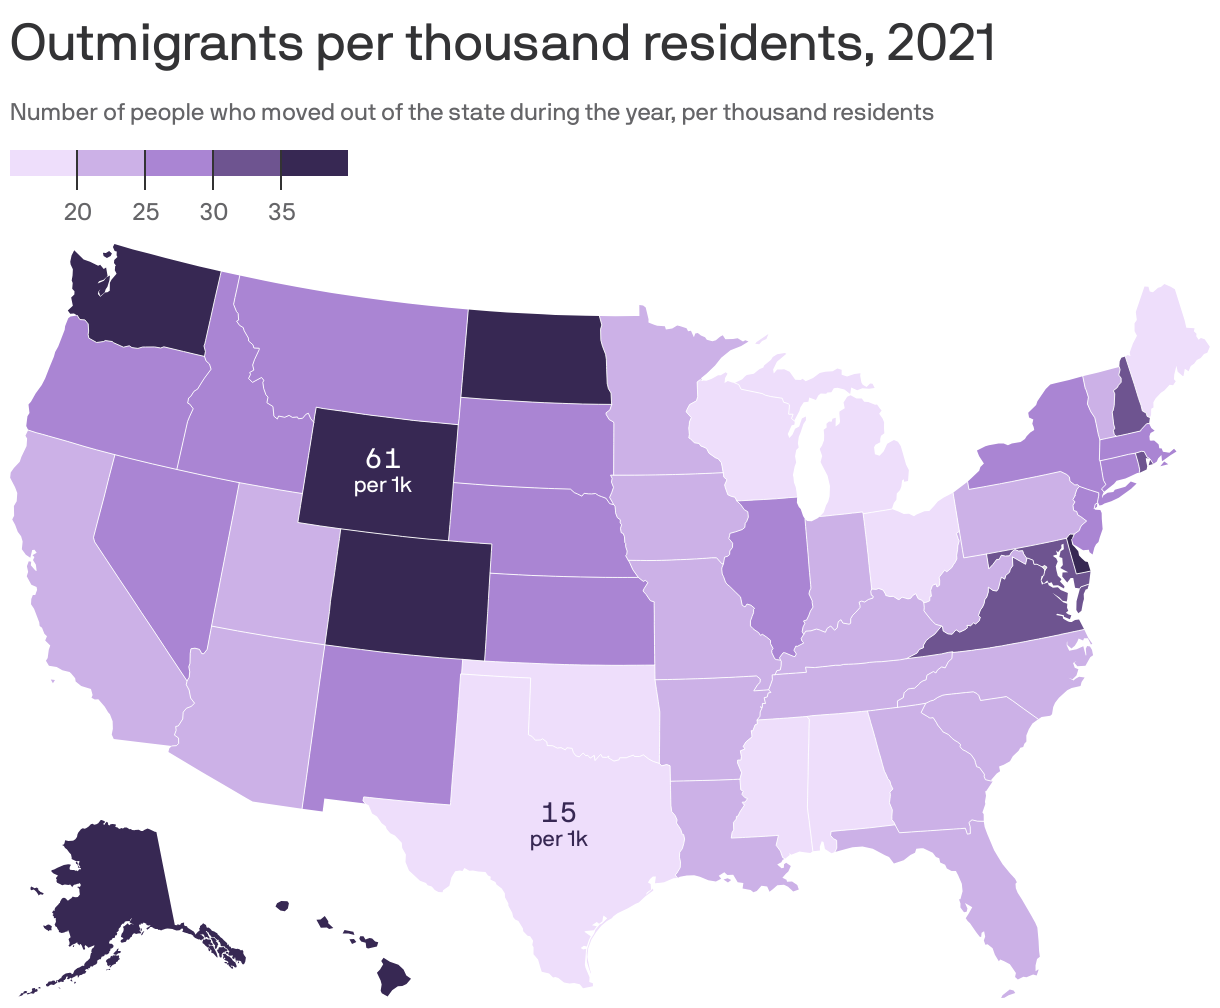 Outmigrants per thousand residents, 2021